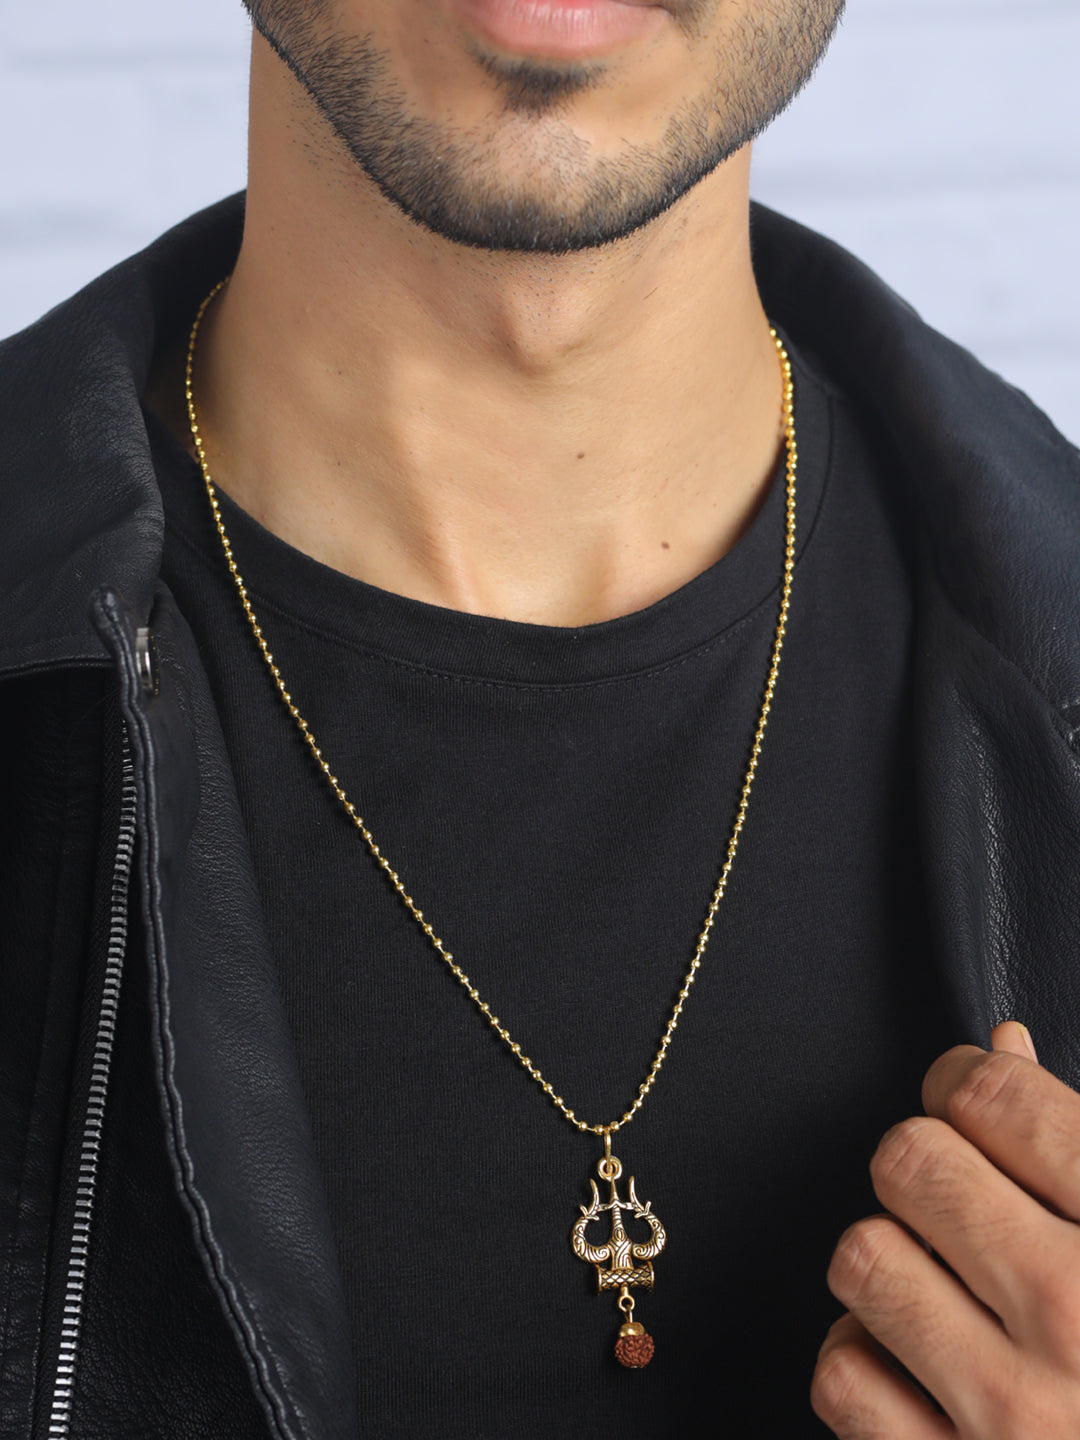 18k Gold Necklace Chain Choker Rope Link 2.5mm Gold Plated Stainless Steel Mens  Chain Mens Gold Necklace Gifts for Him by Twistedpendant - Etsy